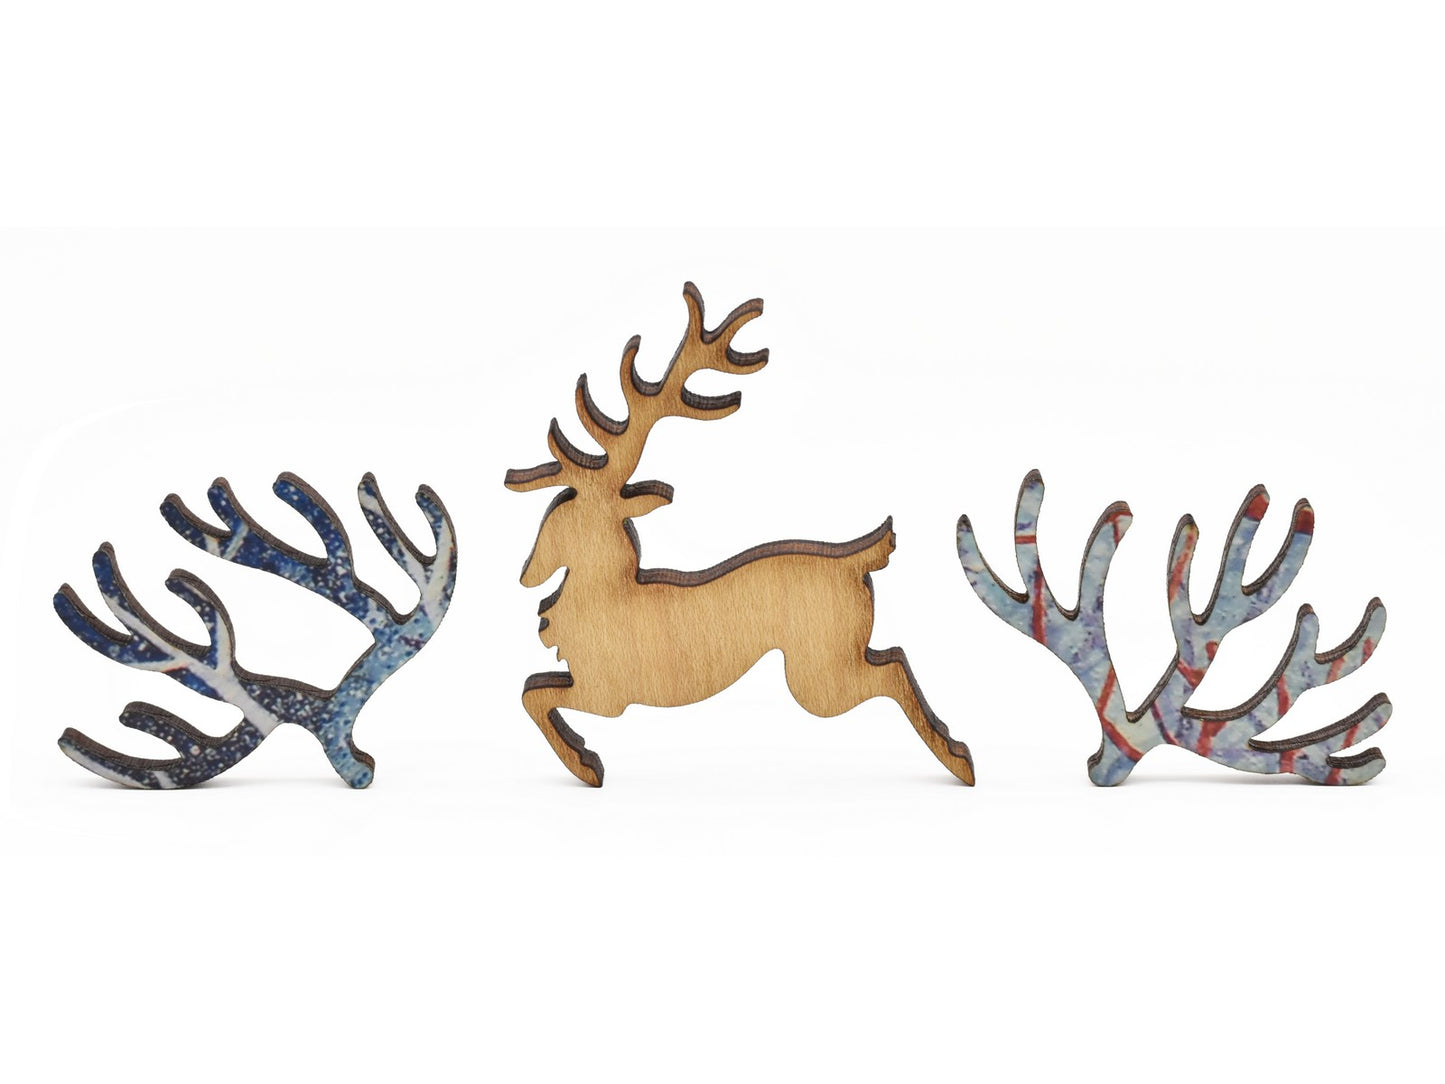 A closeup of pieces in the shape of a deer and branches.